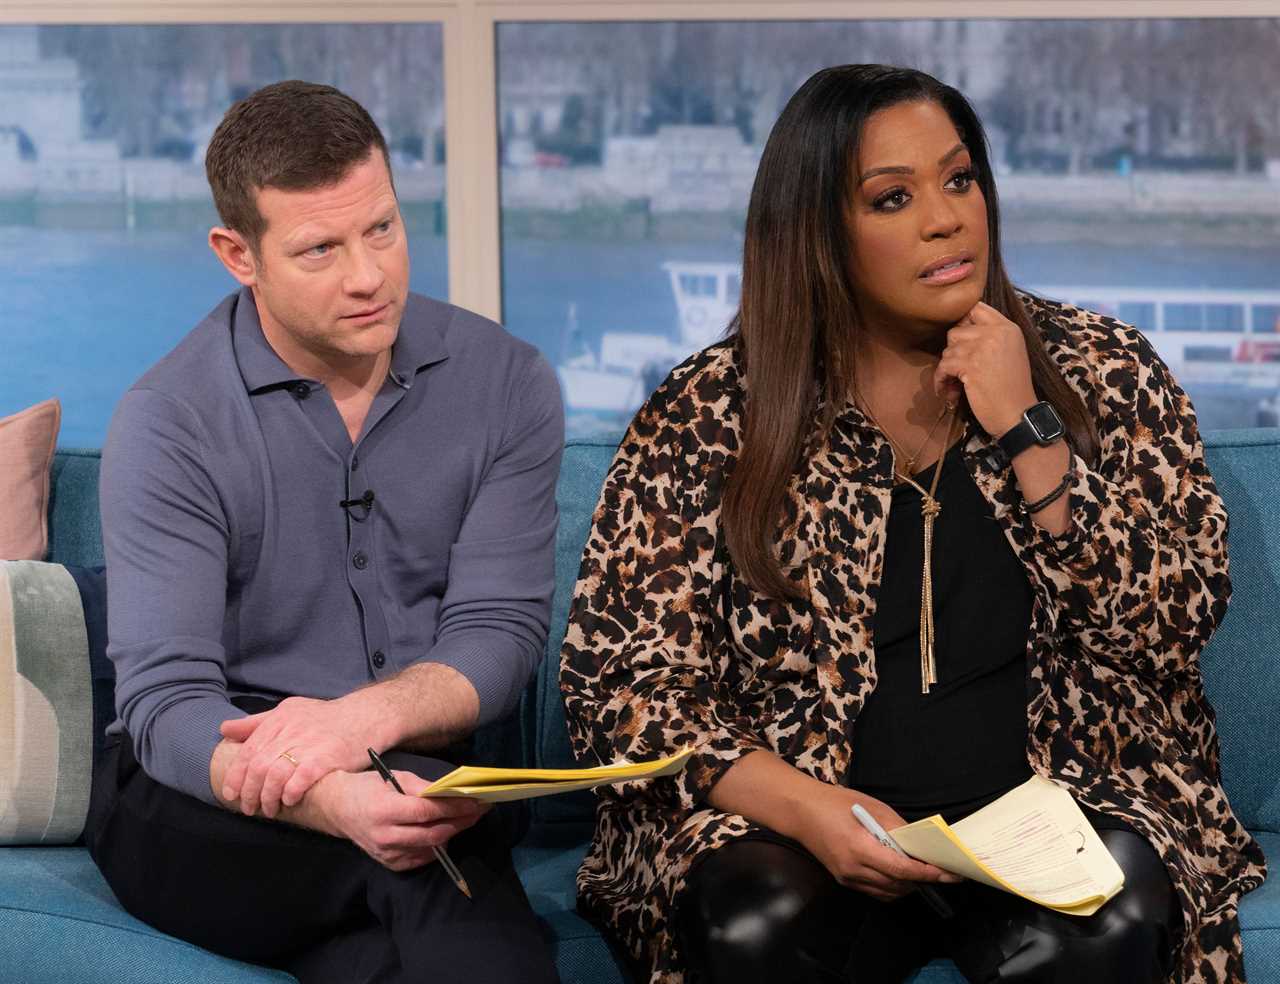 Alison Hammond sparks rumours she’s split from ‘fiance’ Ben with cryptic comment on This Morning